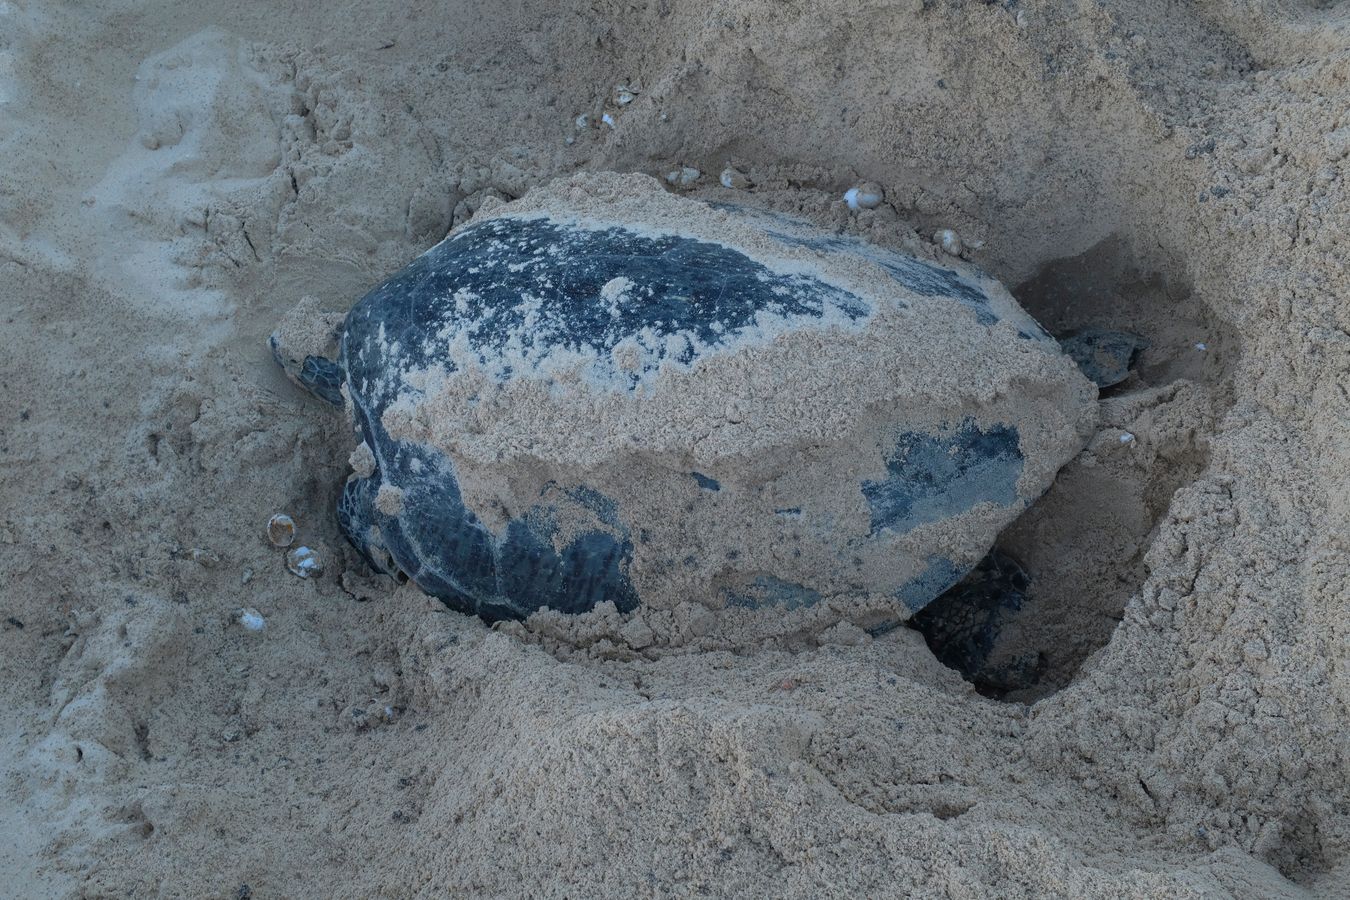 Green turtle that just finished spawning and thet when digging it took out some eggs from other nest that were already deposited there days or weeks befora.